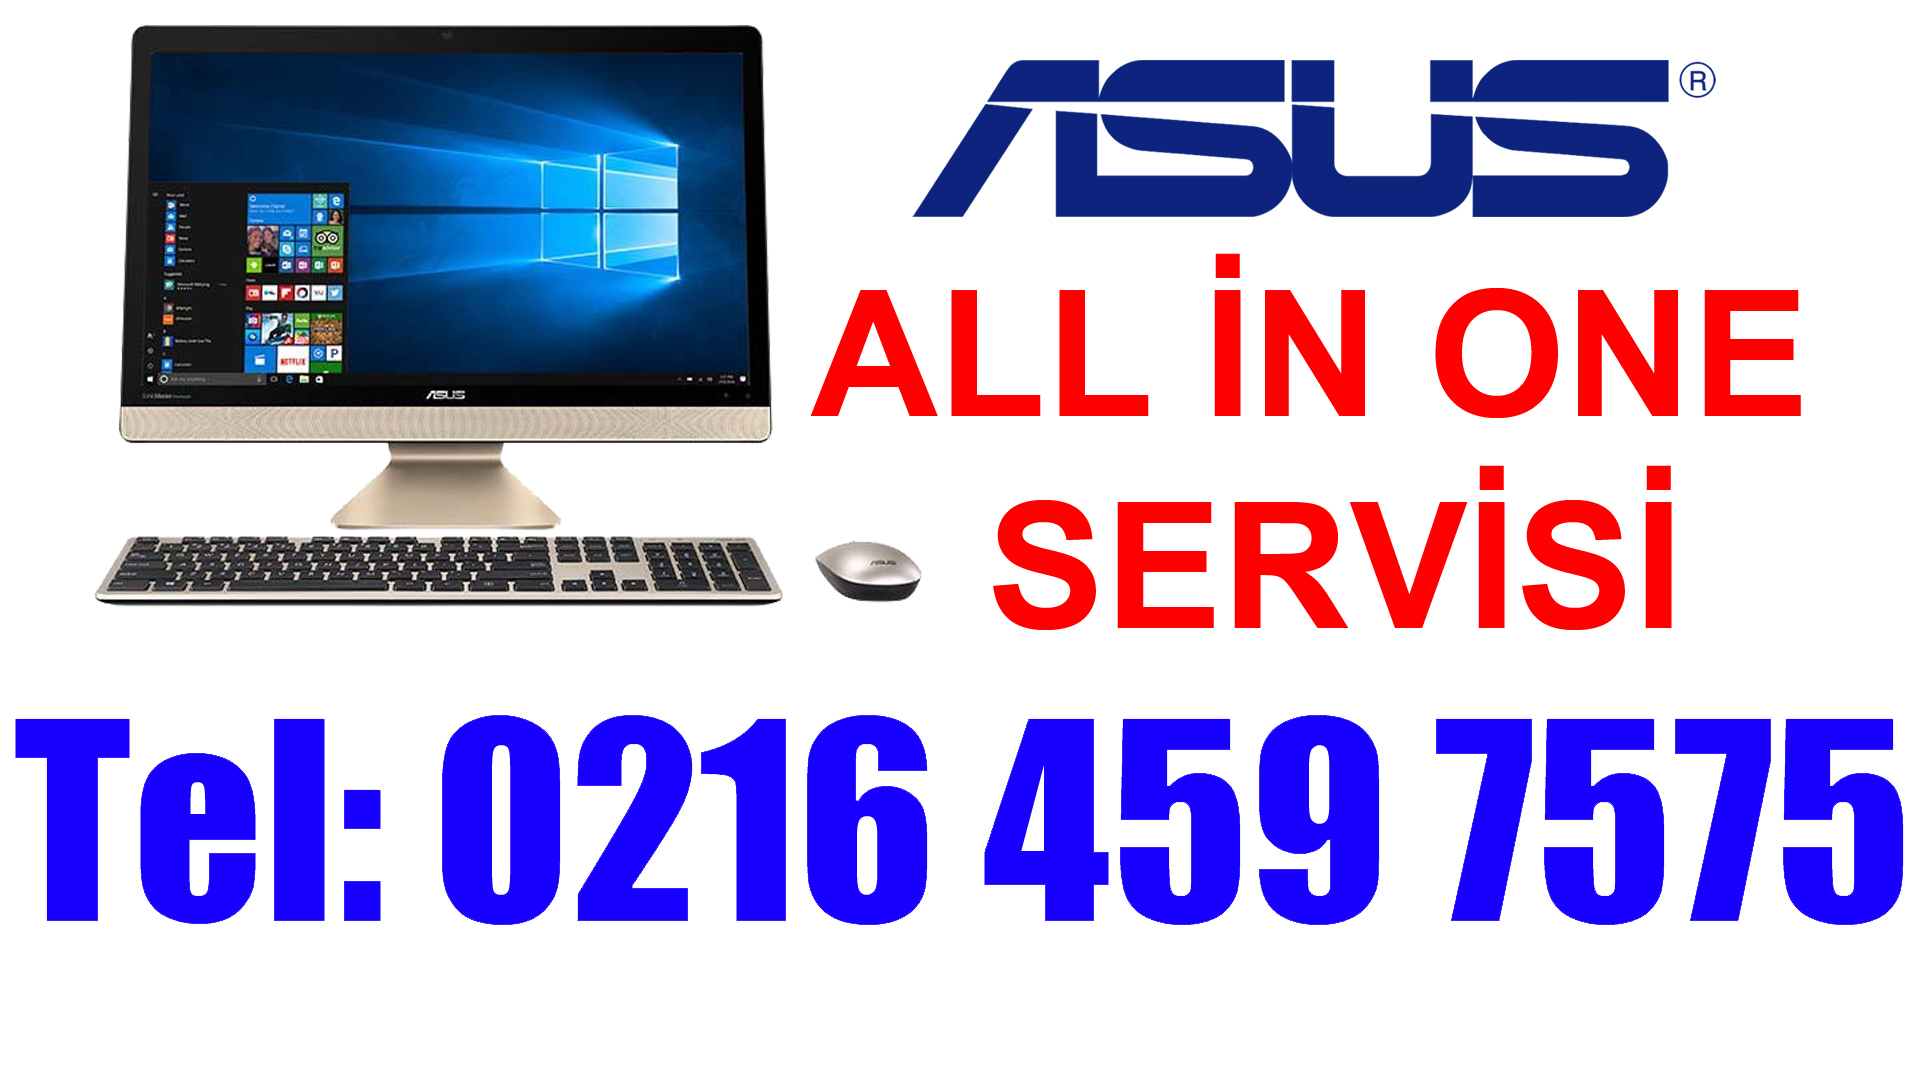 ASUS All in One Servisi